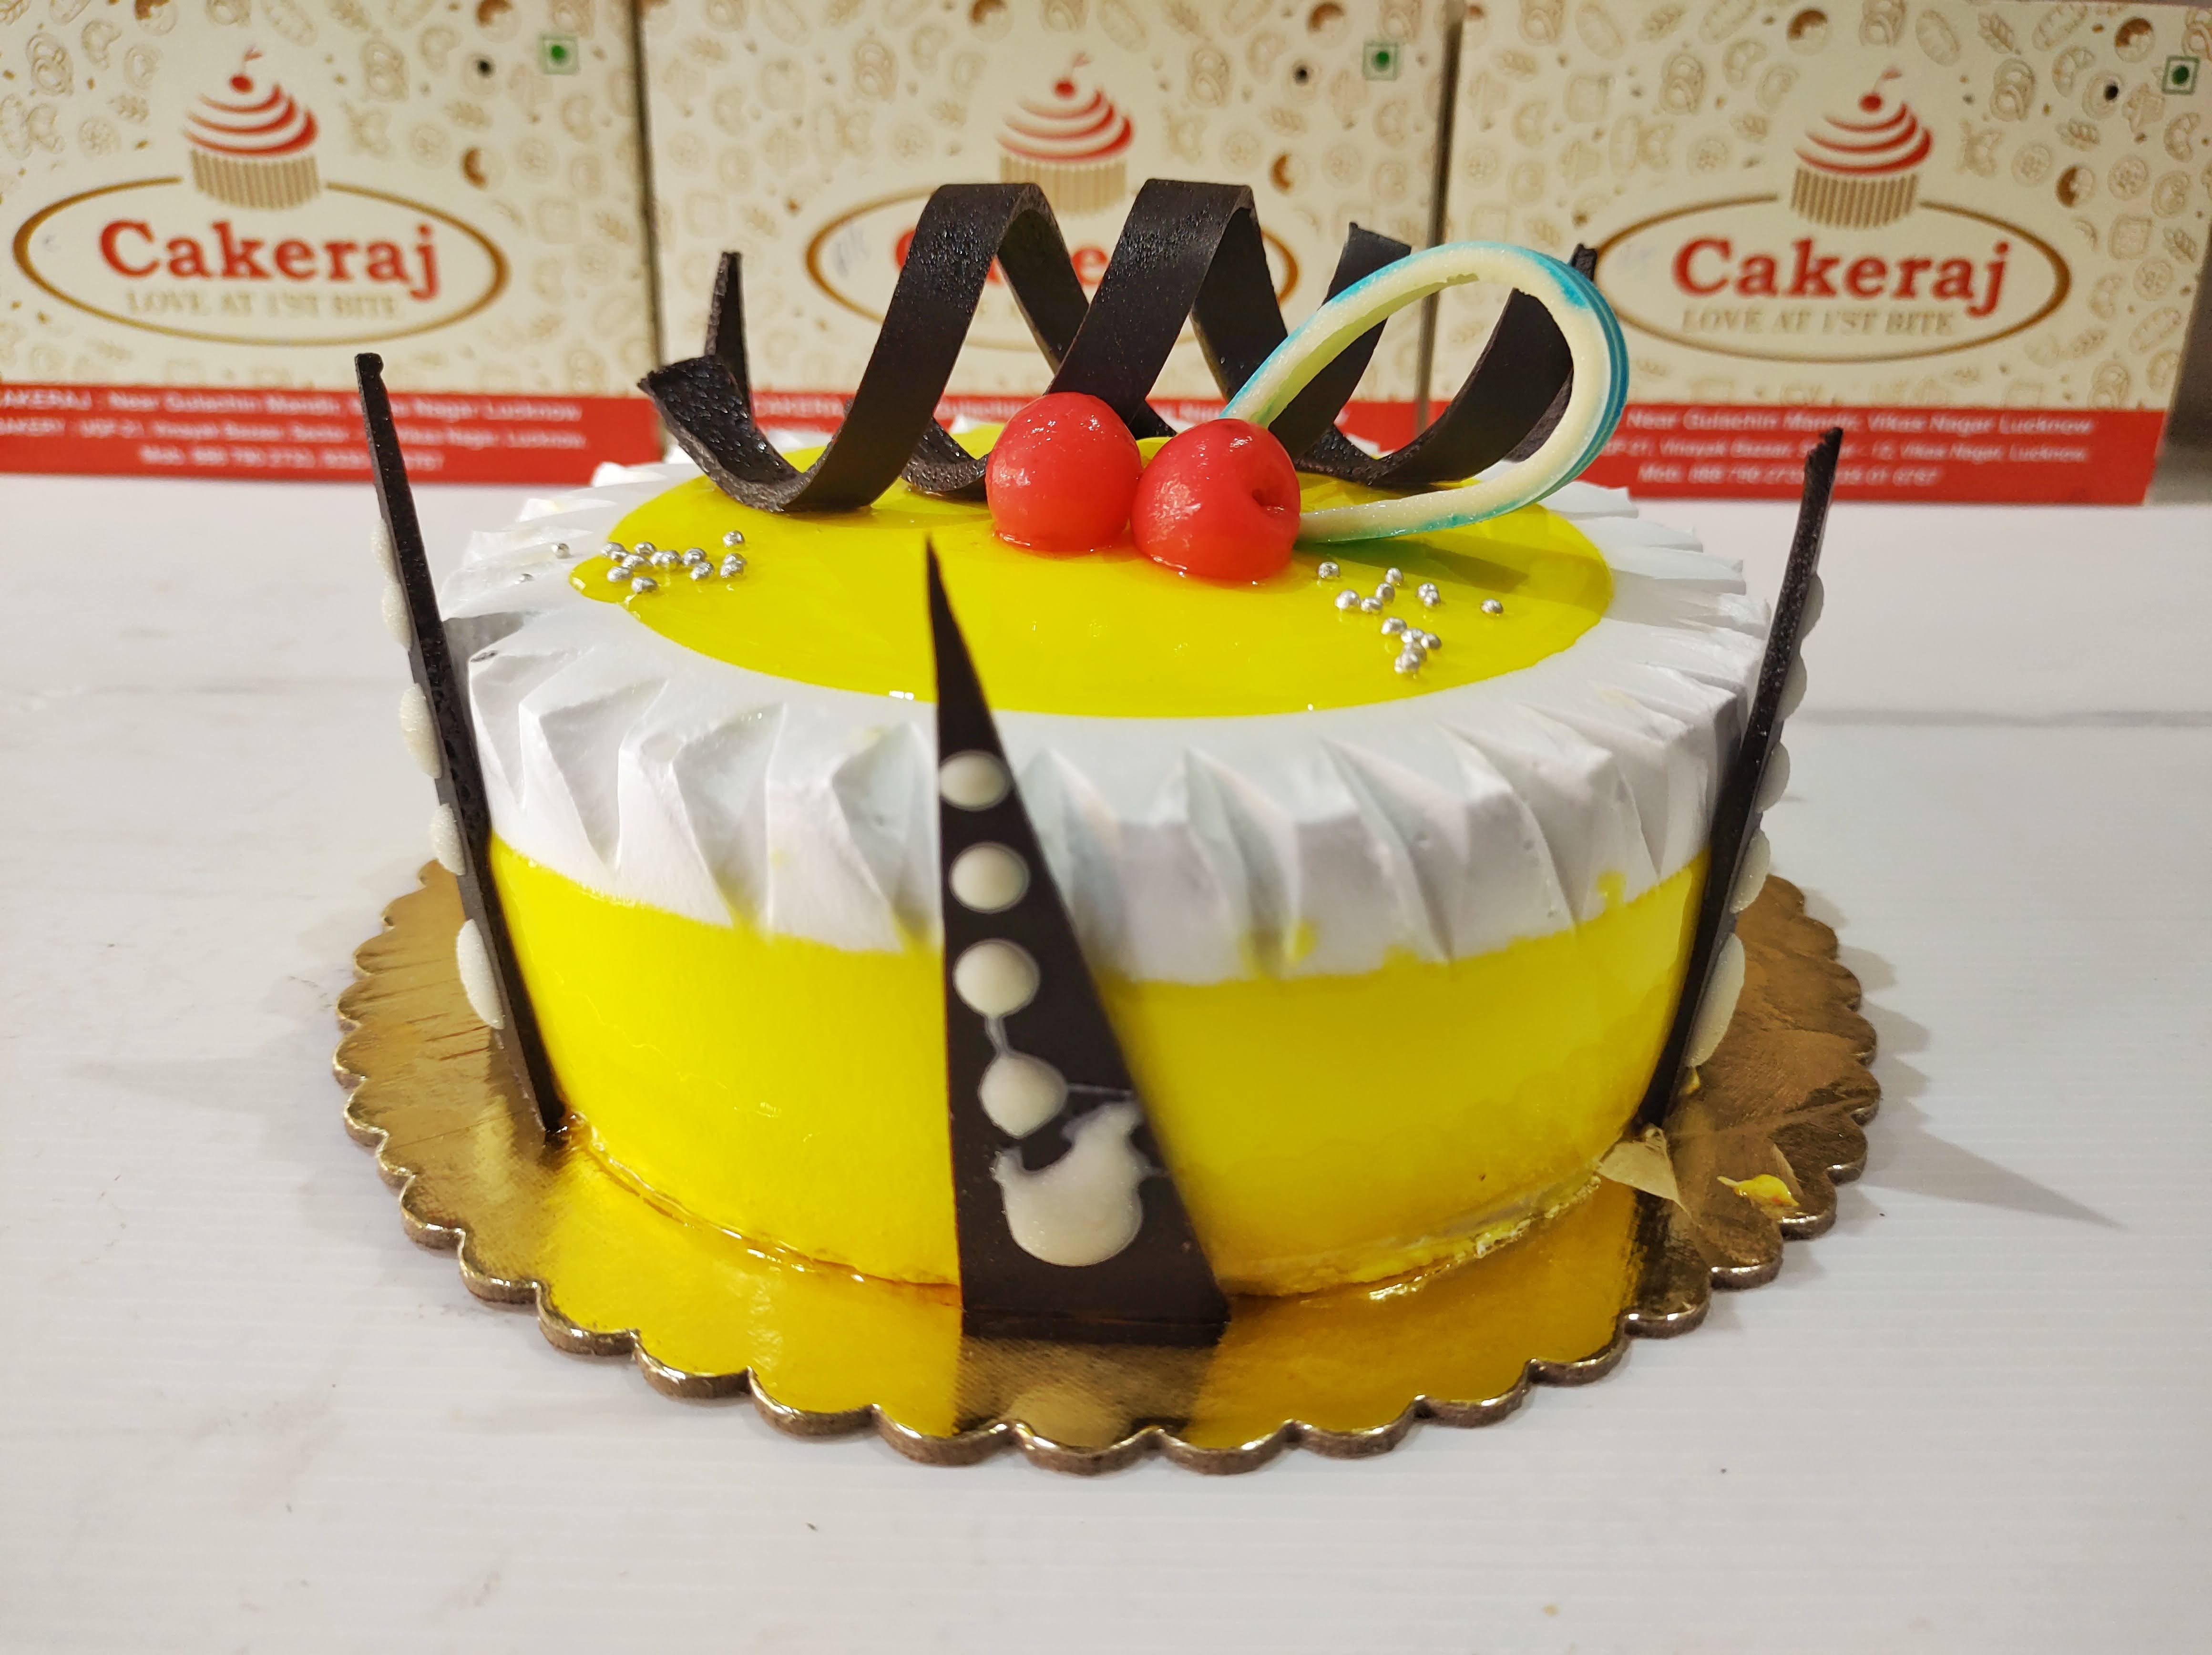 I ordered a cake for 2000 via zomato and has been deceived : r/indiasocial